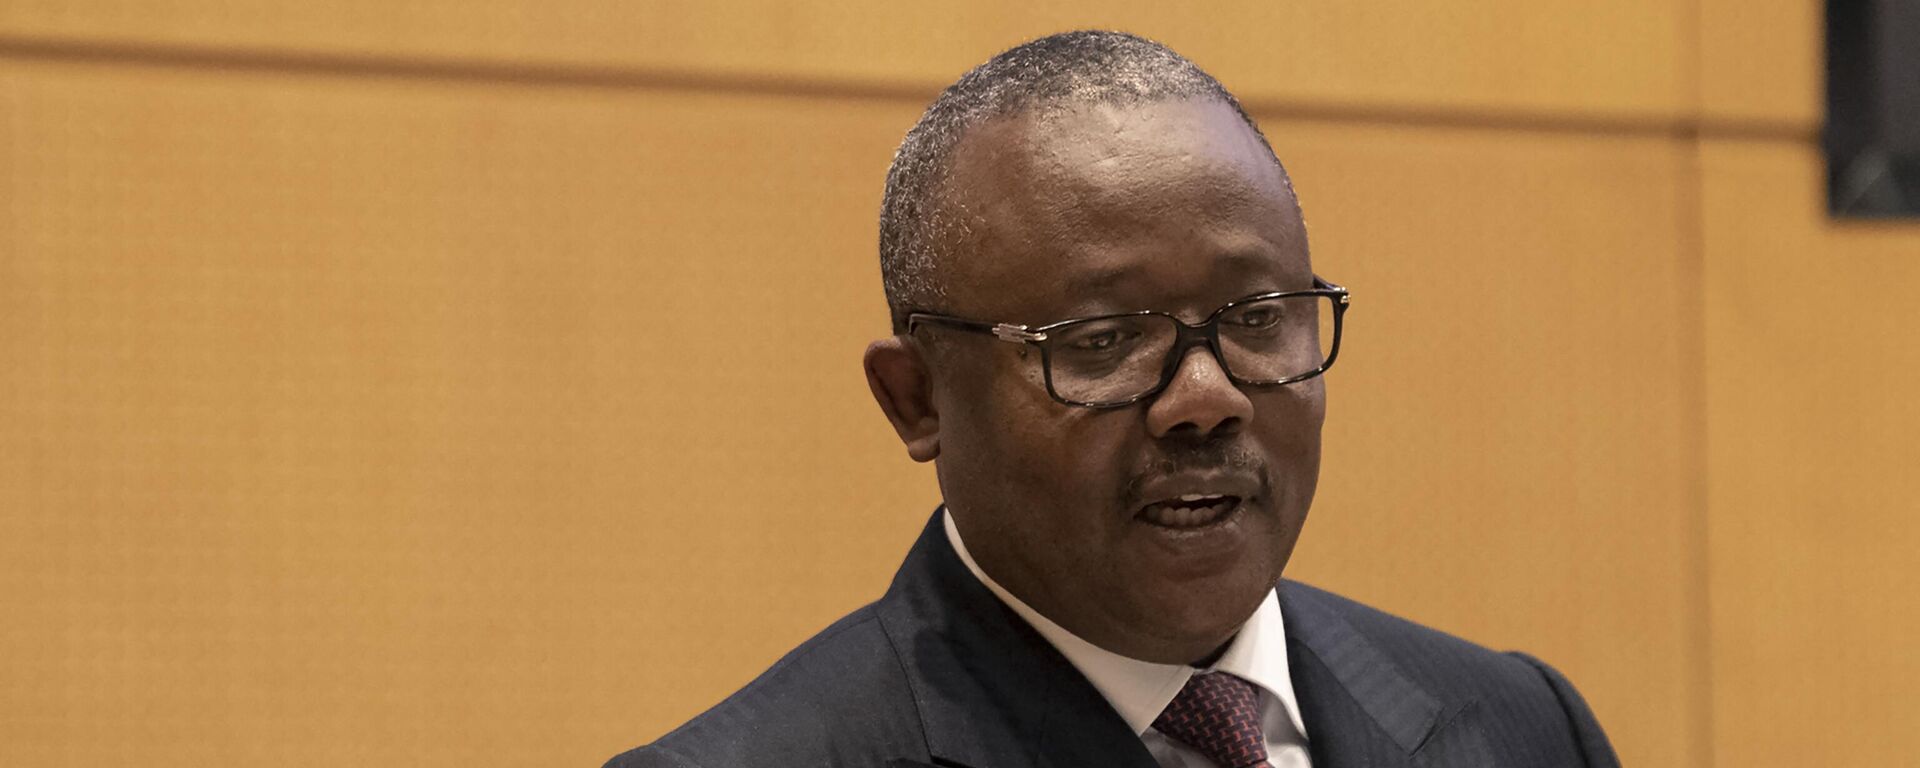 Guinea Bissau President Umaro Sissoco Embalo attends a sideline event on combating malaria in the continent during the 36th session of the Assembly of the African Union (AU) at the African Union Headquarters in Addis Ababa on February 18, 2023. - Sputnik International, 1920, 20.02.2023